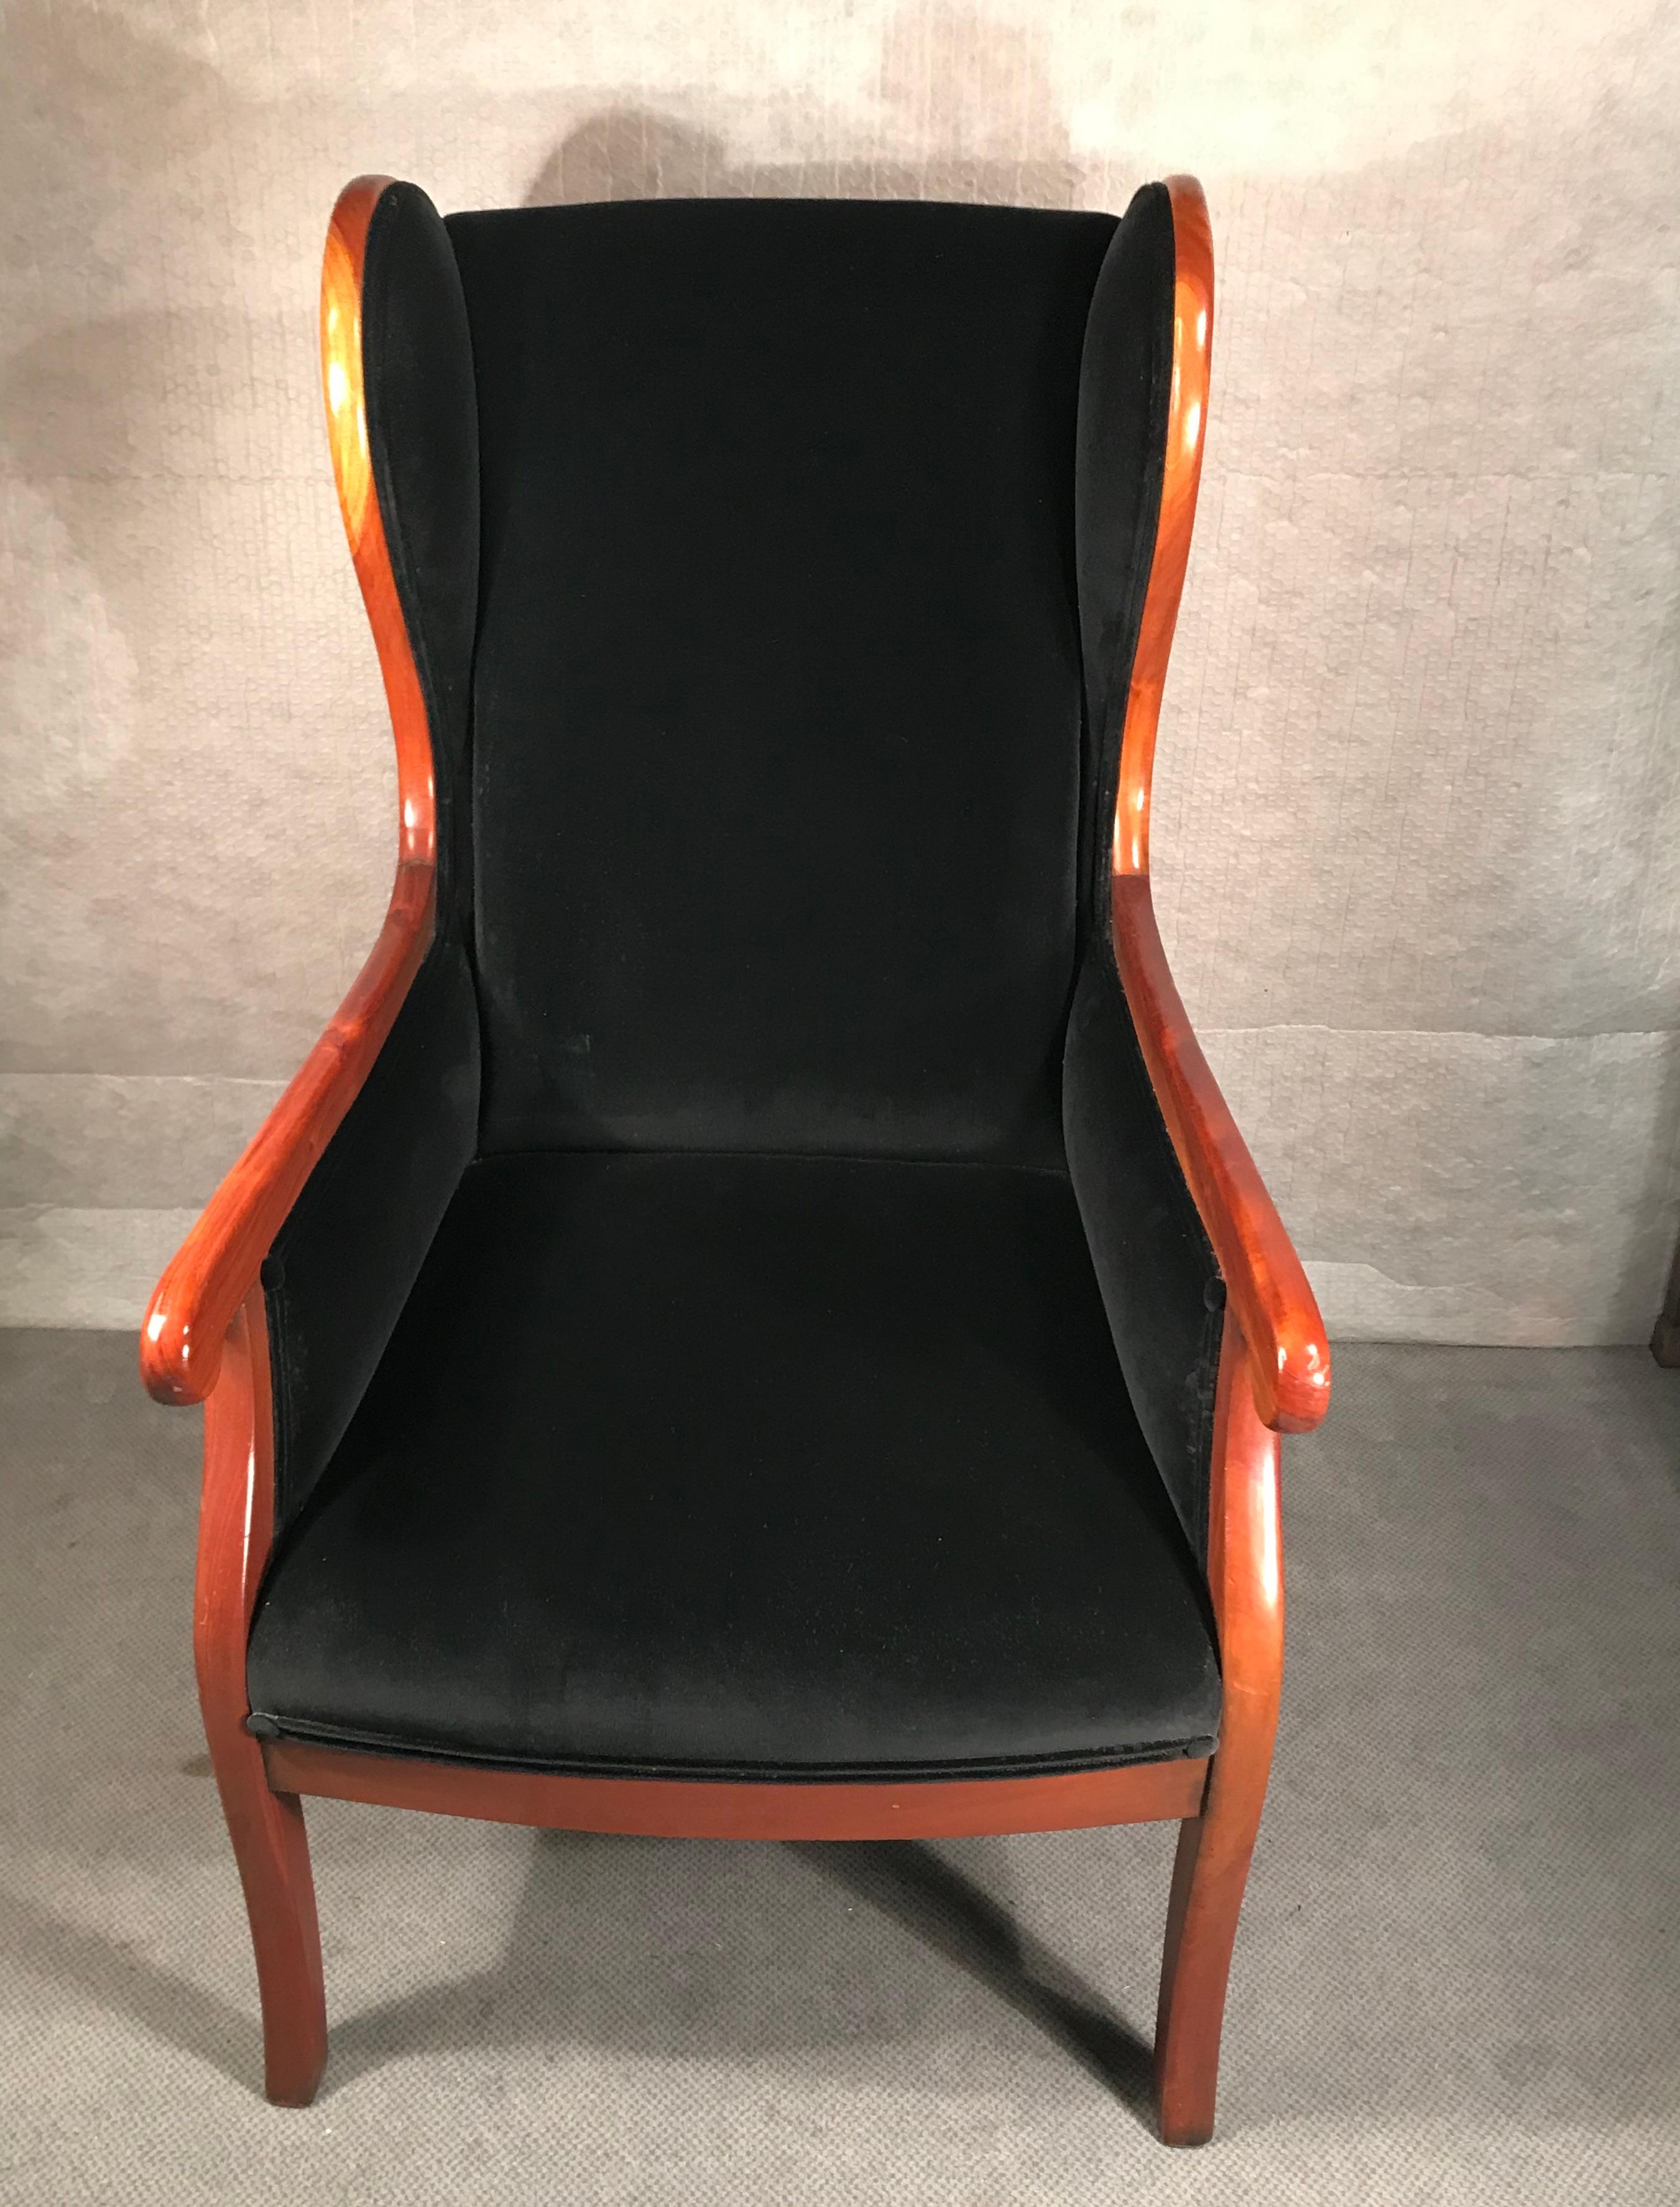 Biedermeier wingback armchair, South German 1840, yew tree.
This beautiful original Biedermeier wingback armchair is in very good refinished condition. The seat and back are covered with a dark blue velvet fabric.
The chair is comfortable and could